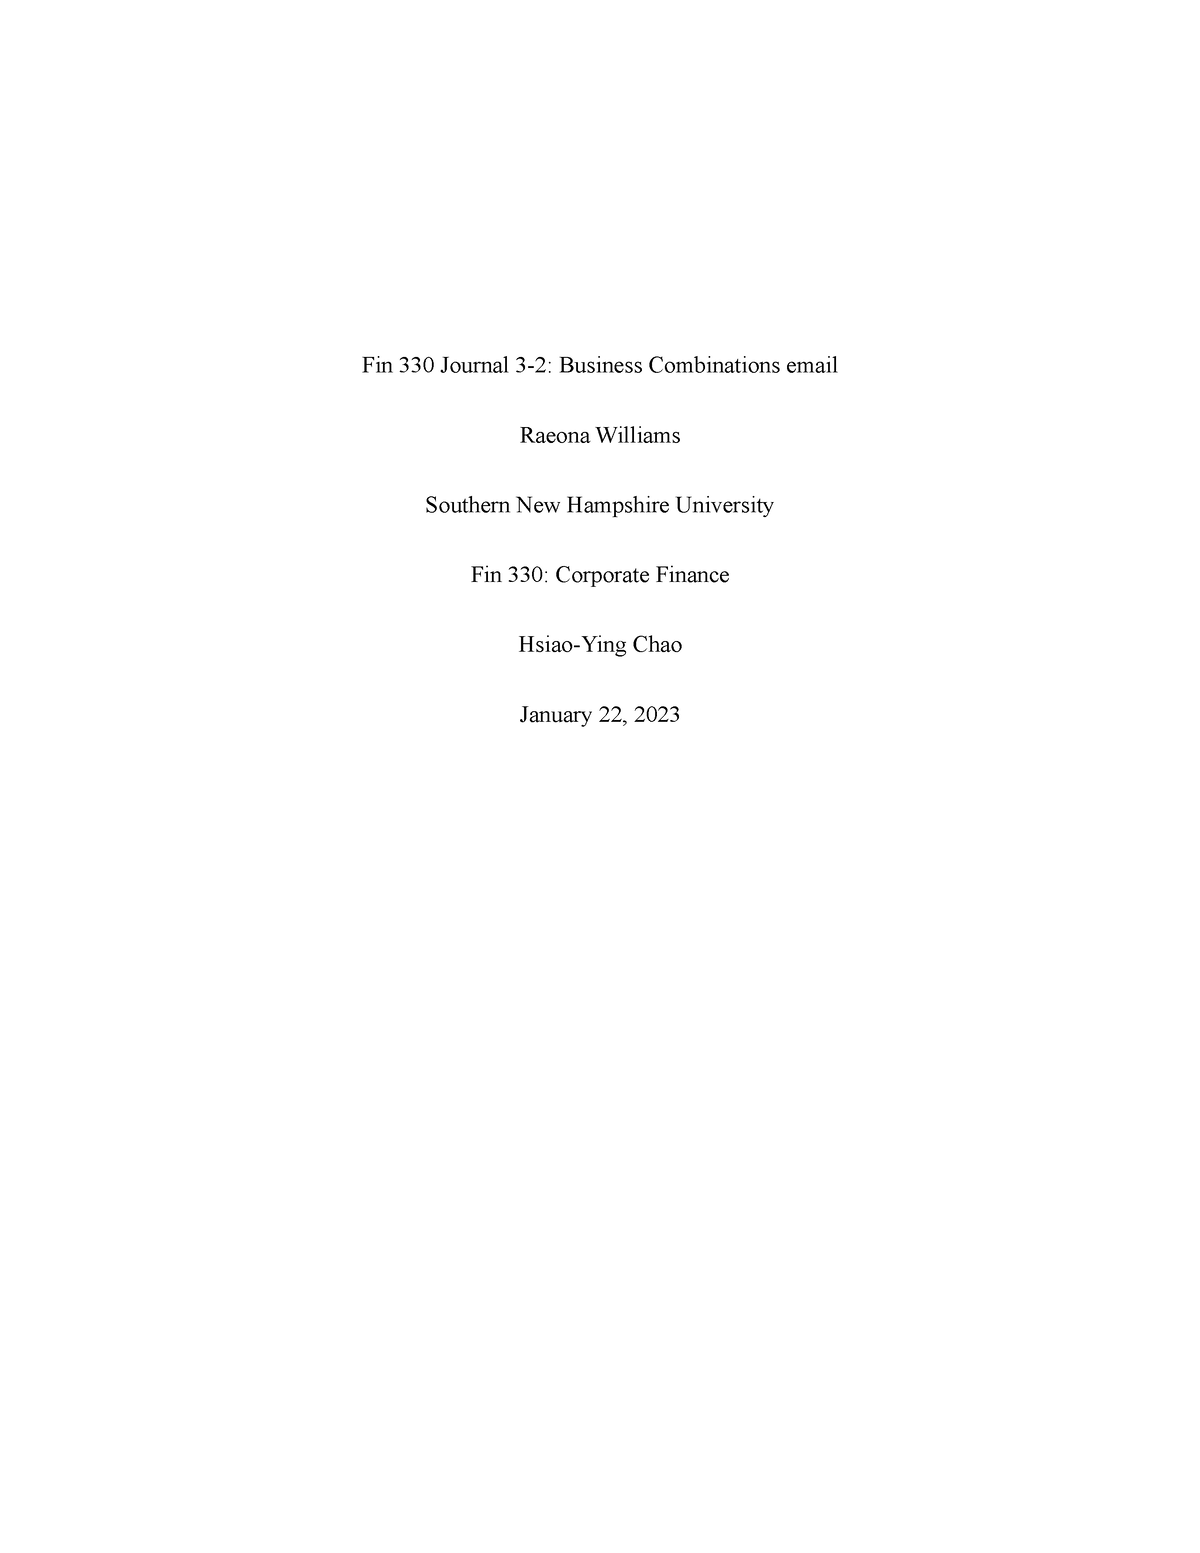 3-2 Journal fin 330 - Fin 330 Journal 3-2: Business Combinations email ...